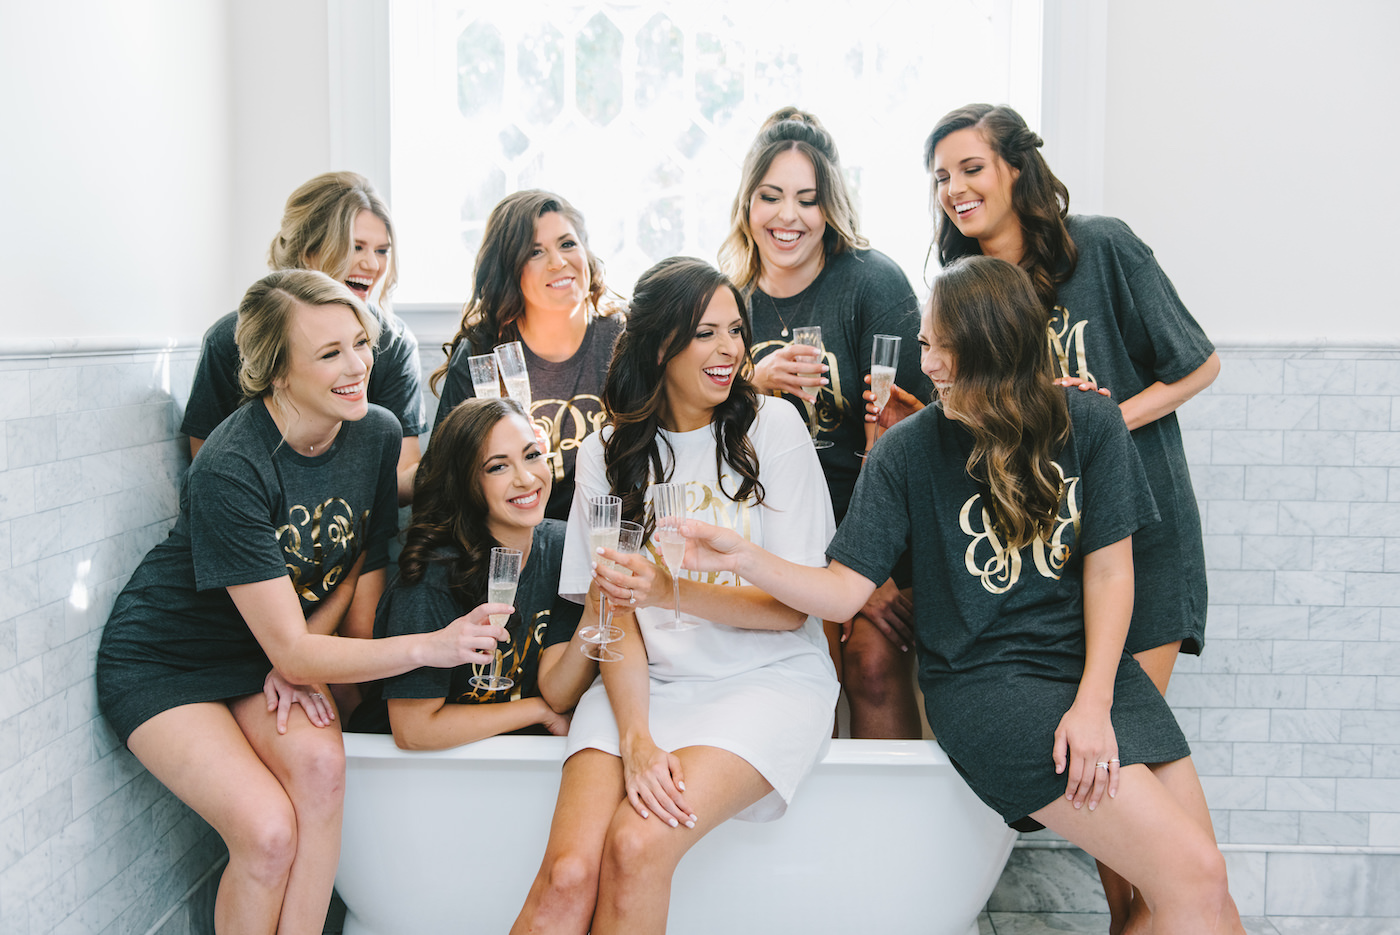 Classic Bride and Bridesmaids in Dark Gray Pajama Tees with Personal Gold Foil Monograms Cheering with Champagne Flutes | Tampa Bay Wedding Photographer Kera Photography